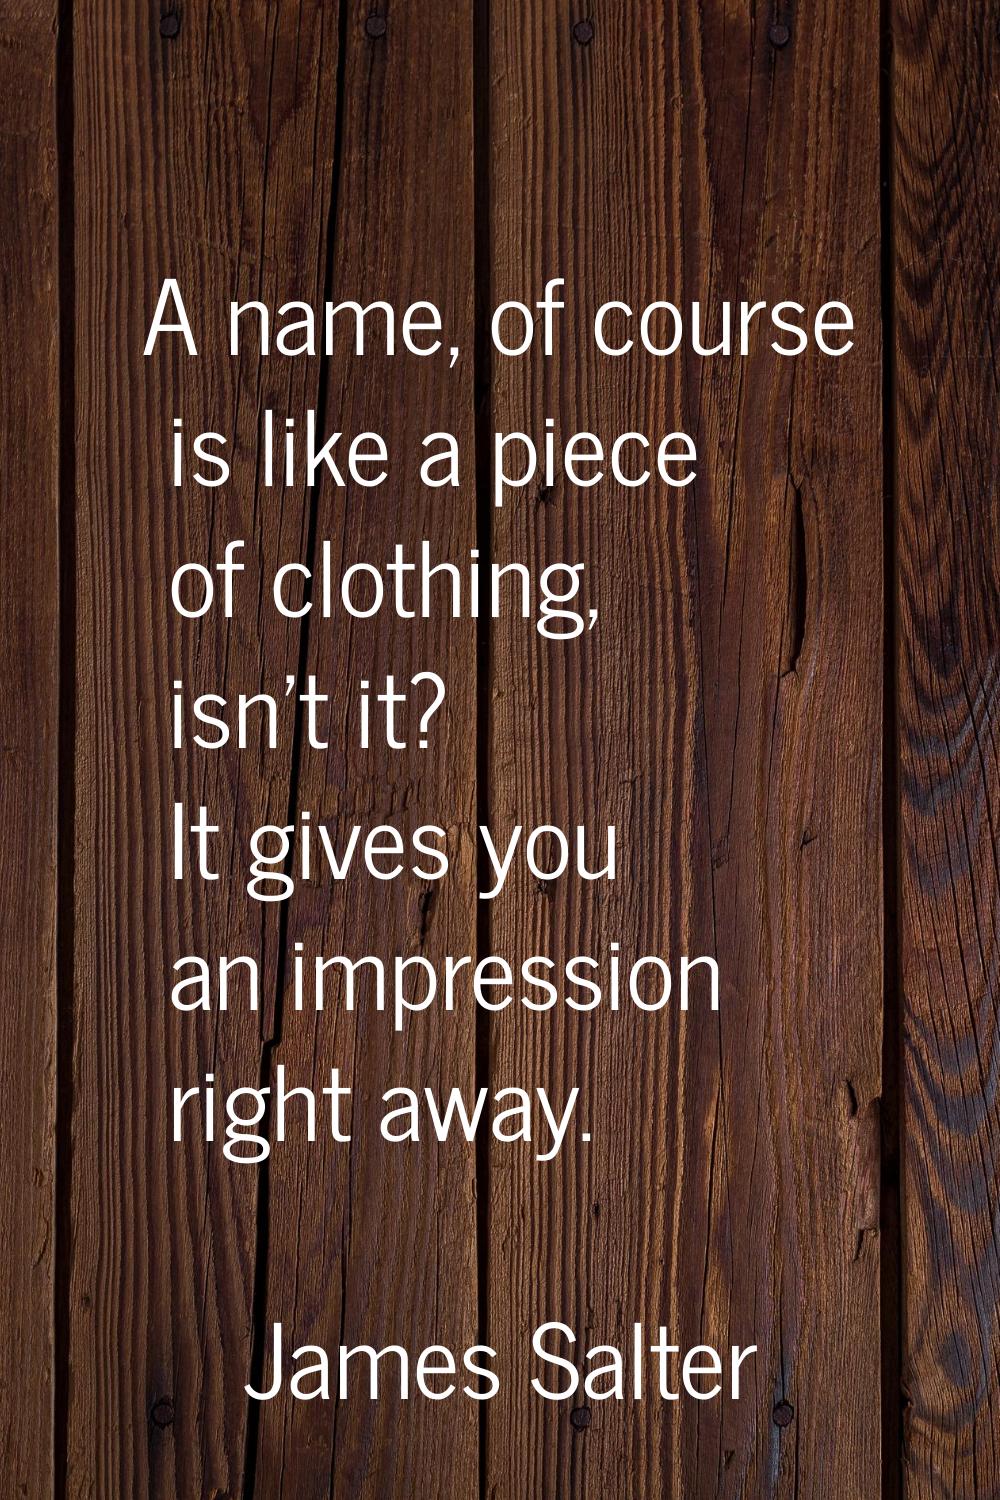 A name, of course is like a piece of clothing, isn't it? It gives you an impression right away.